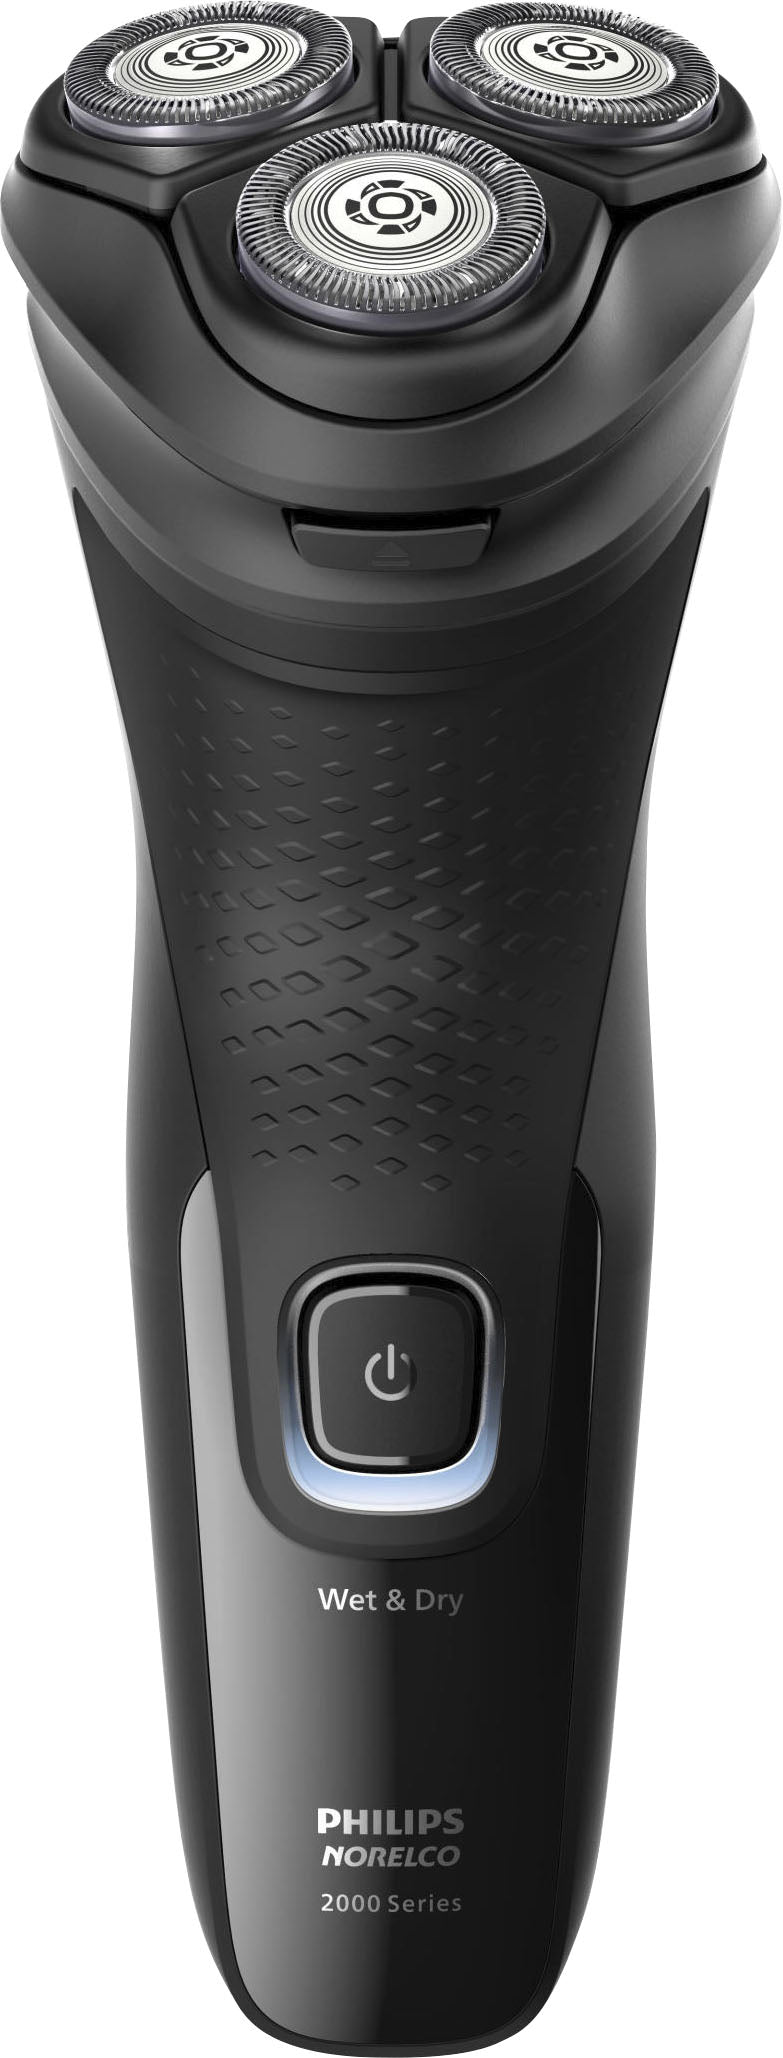 Philips Norelco Shaver 2400, Cordless Electric Shaver with Pop-Up Trimmer - Deep Black_0